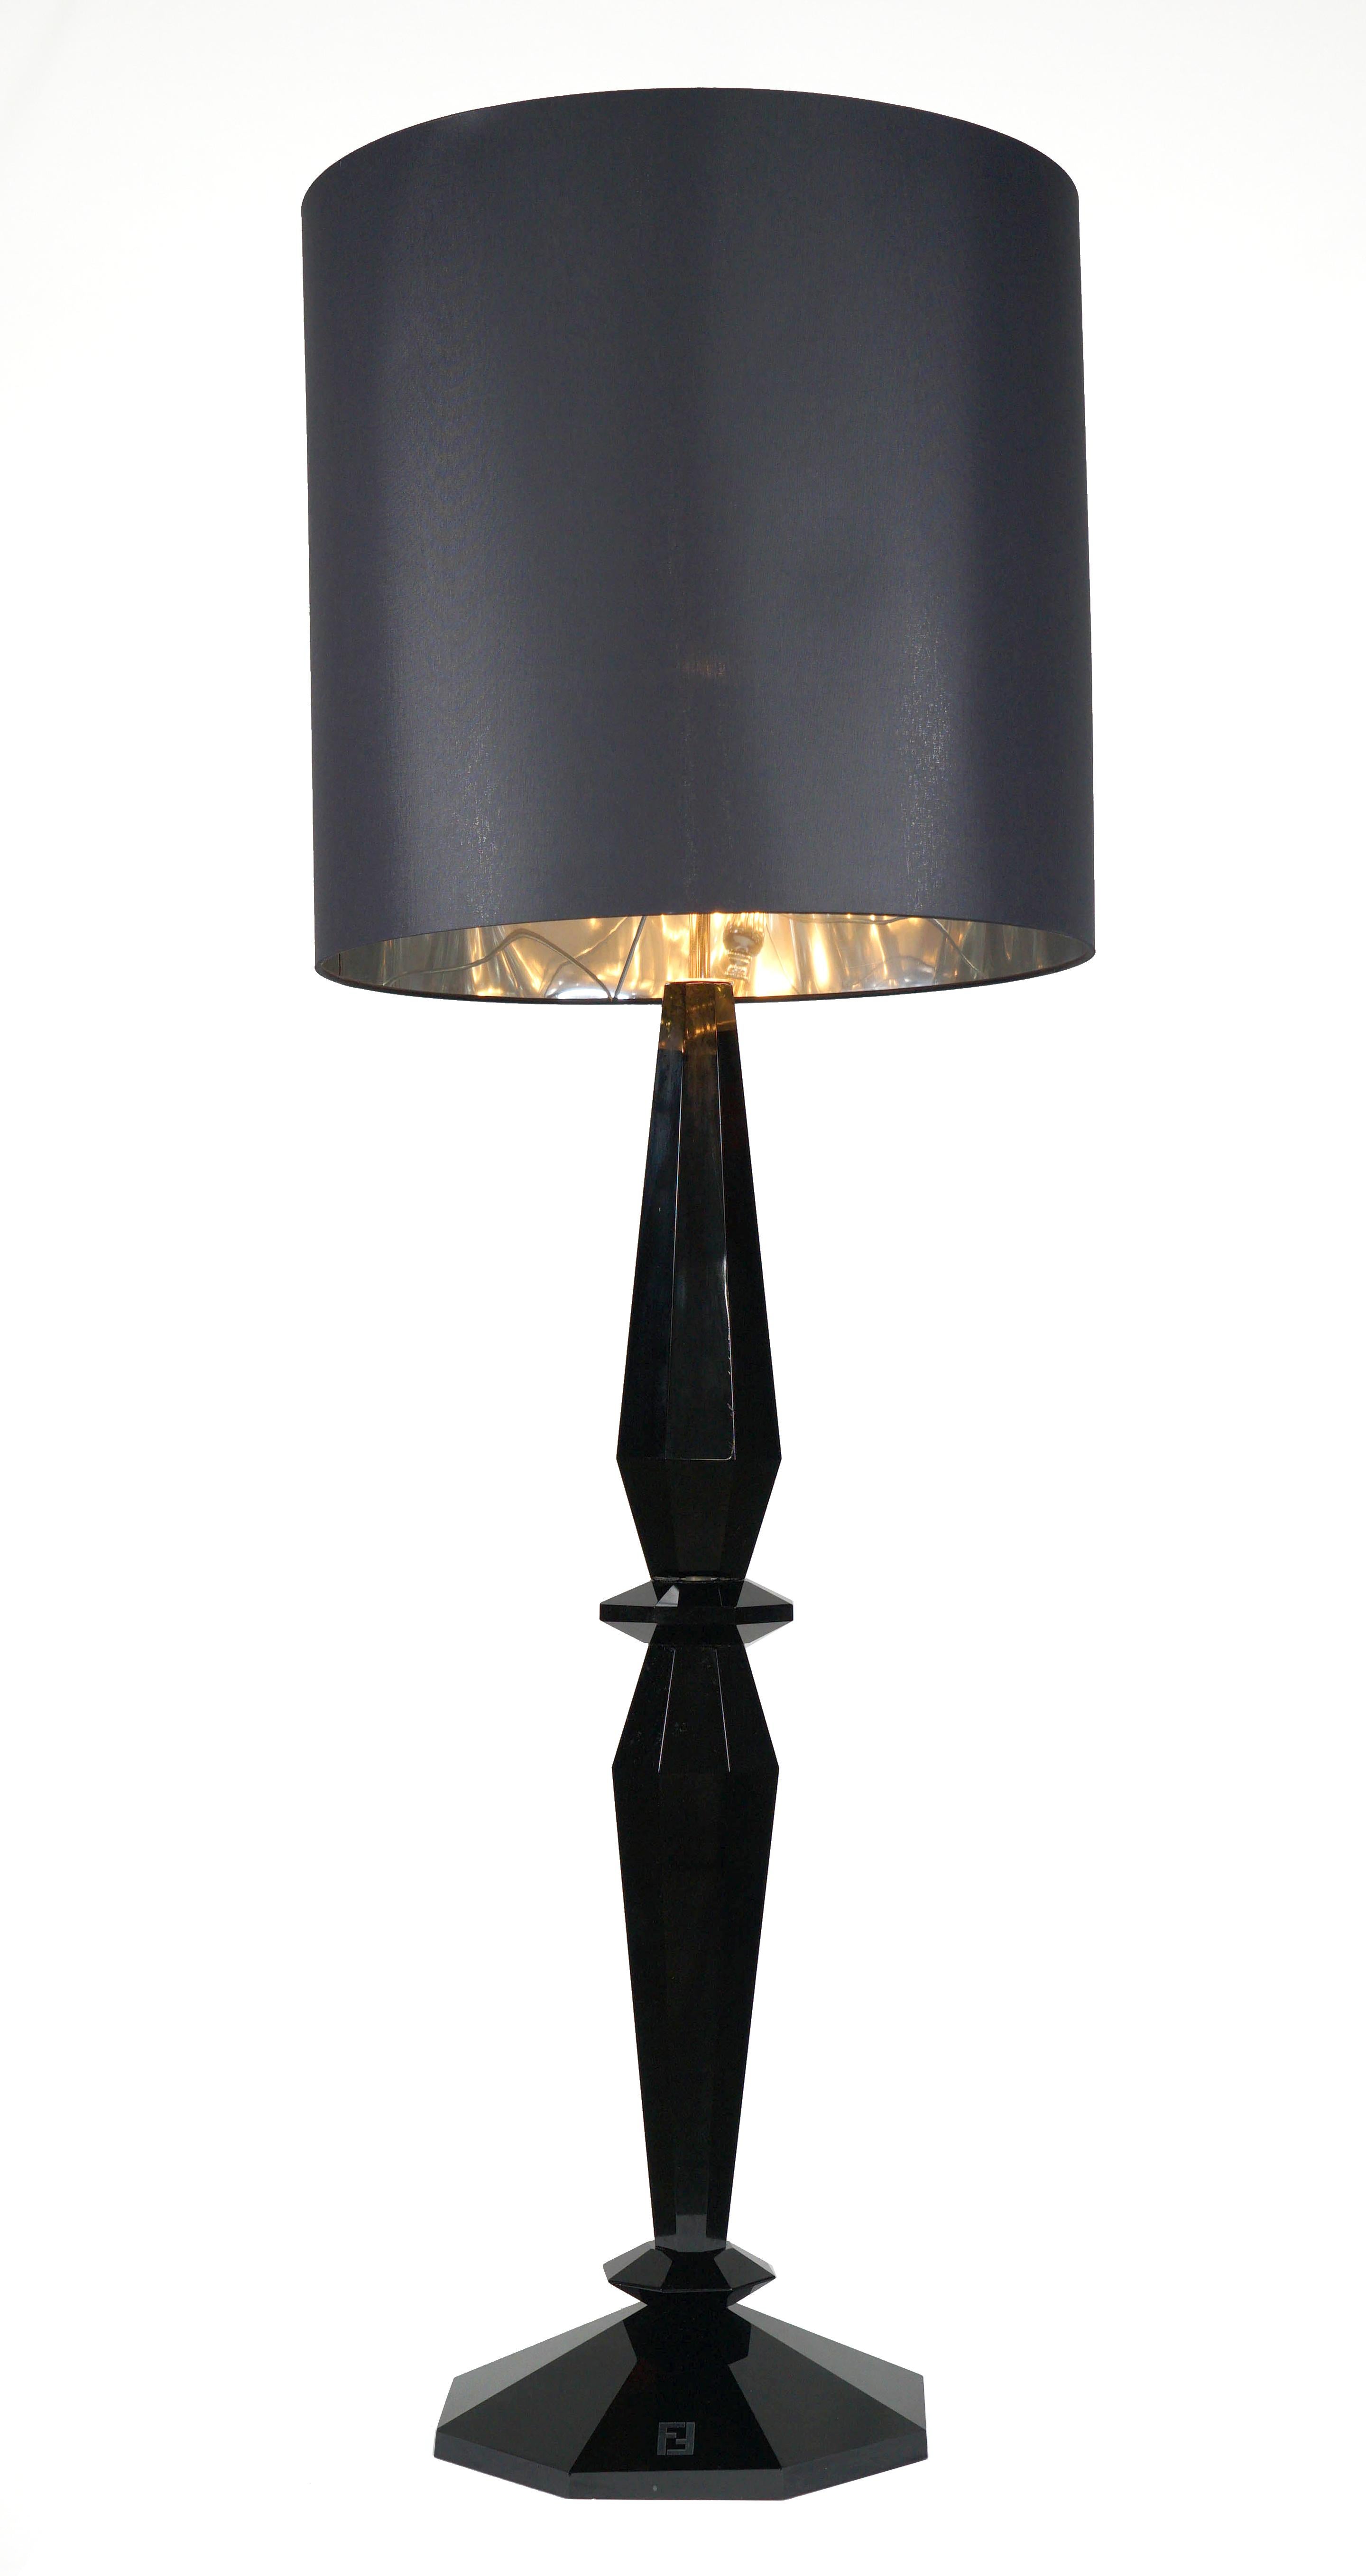 Hand blown Murano glass base in black tone with black silk covered paper lampshade. The brightness and color are due to an artistic approach which is part of the historical and cultural heritage of Venice and Italy. Therefore, any small